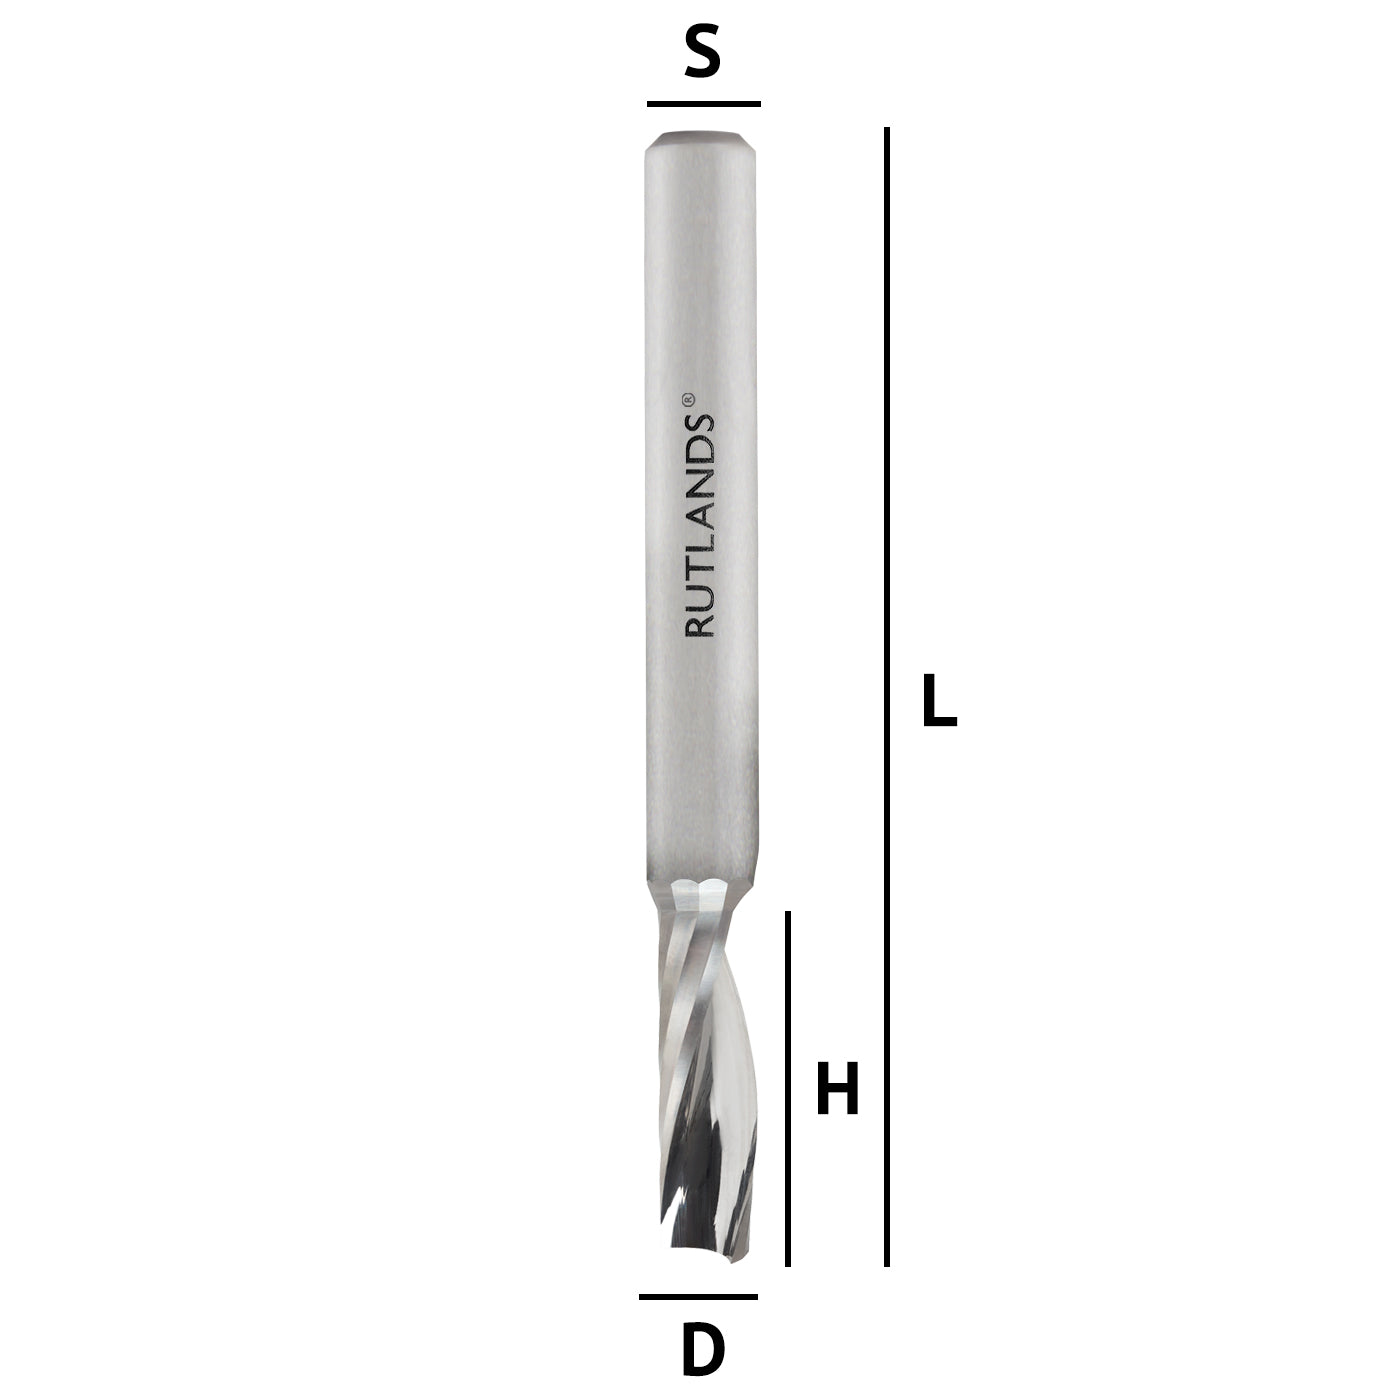 Solid Carbide - Spiral Up Cut Acrylic - D=6.35mm H=19mm L=63mm S=1/4"